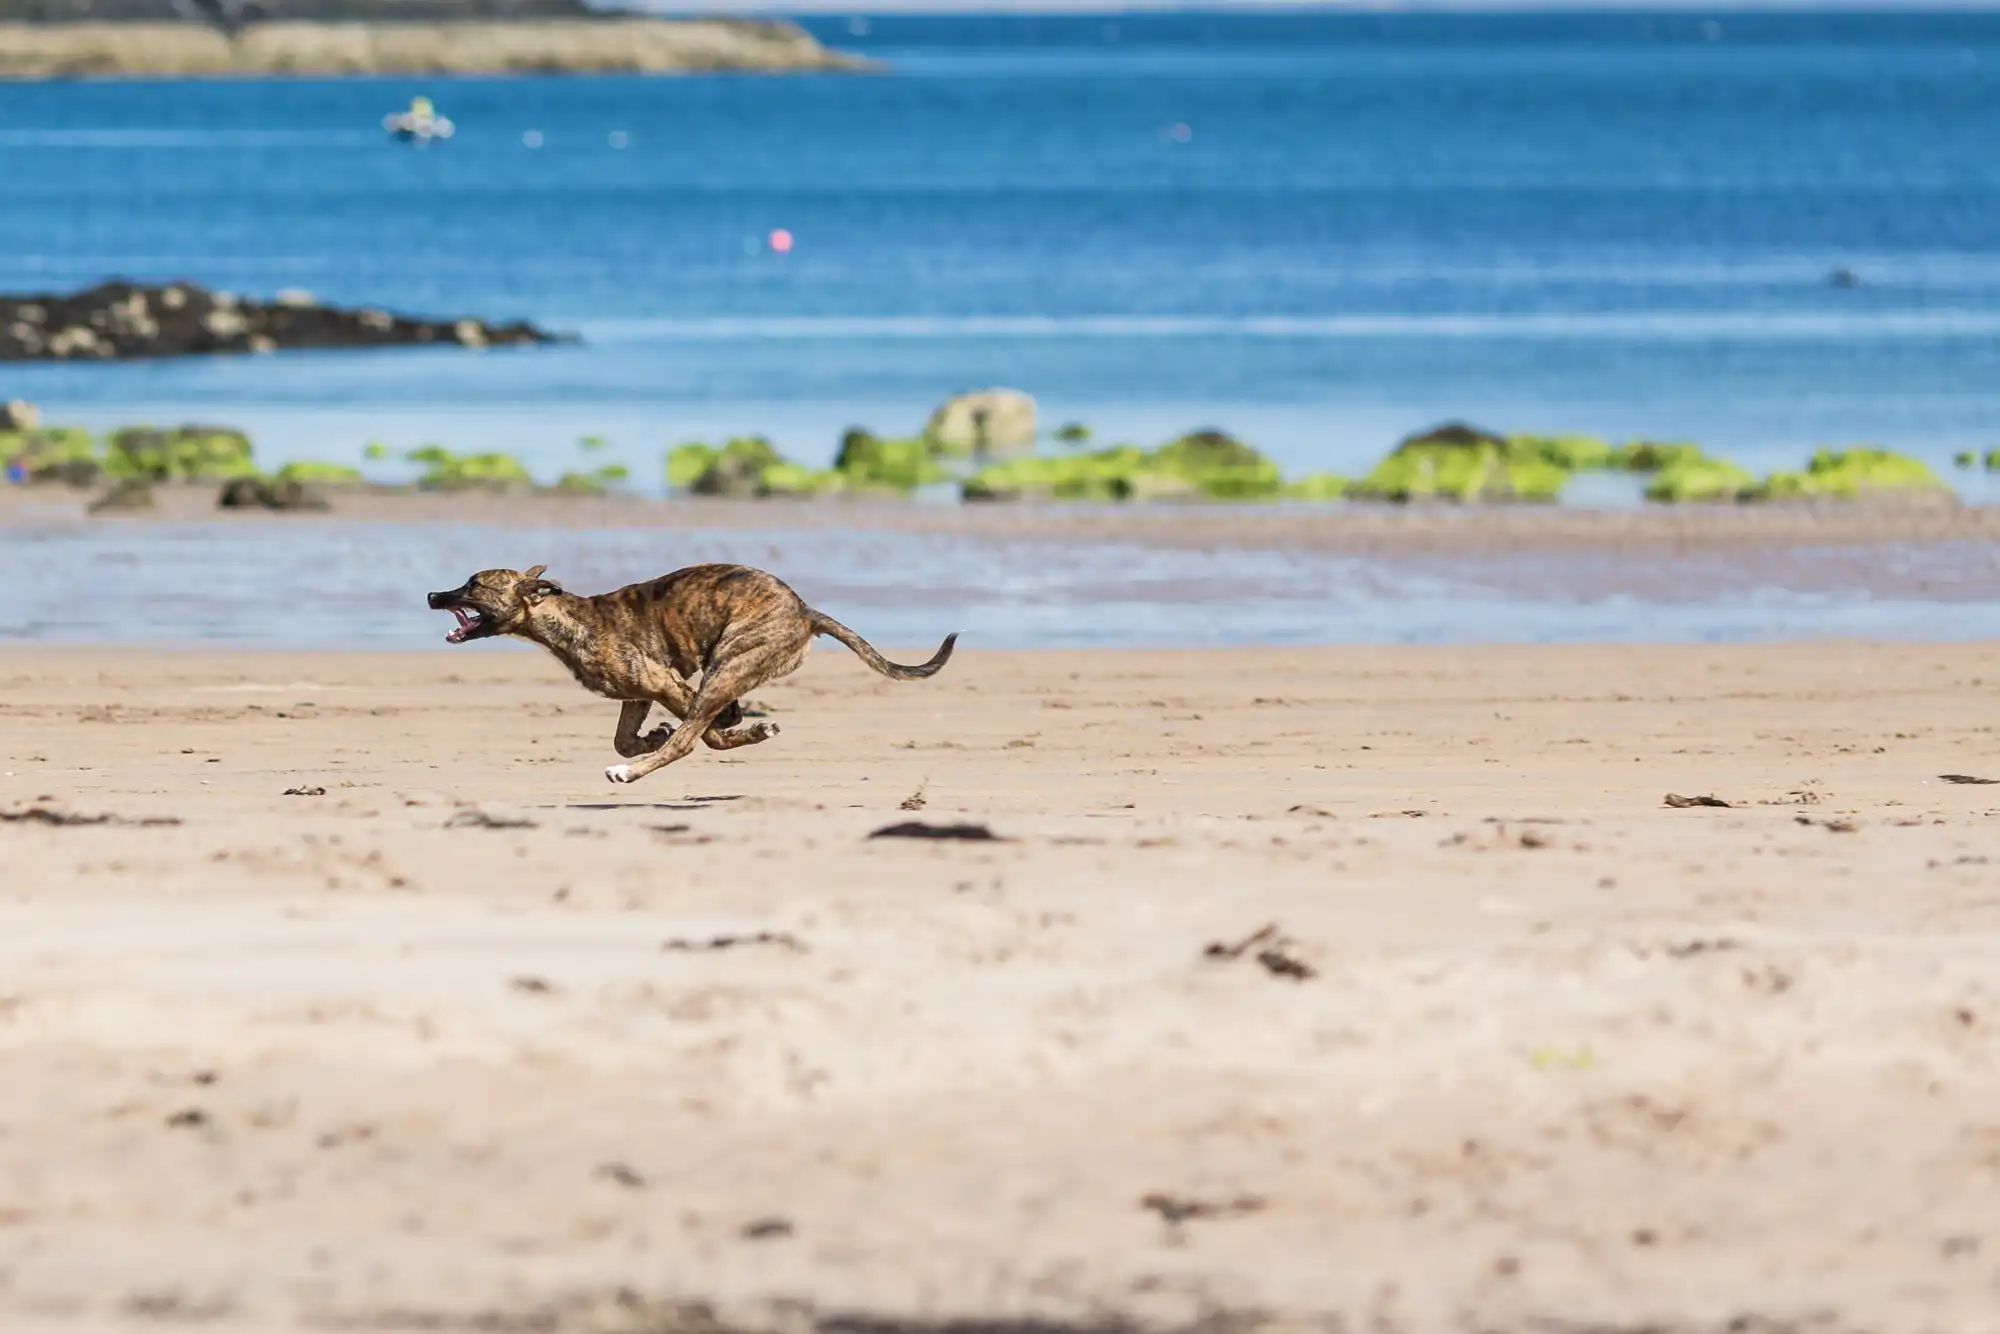 A brown dog running energetically across a sandy beach with the ocean and blue sky in the background.